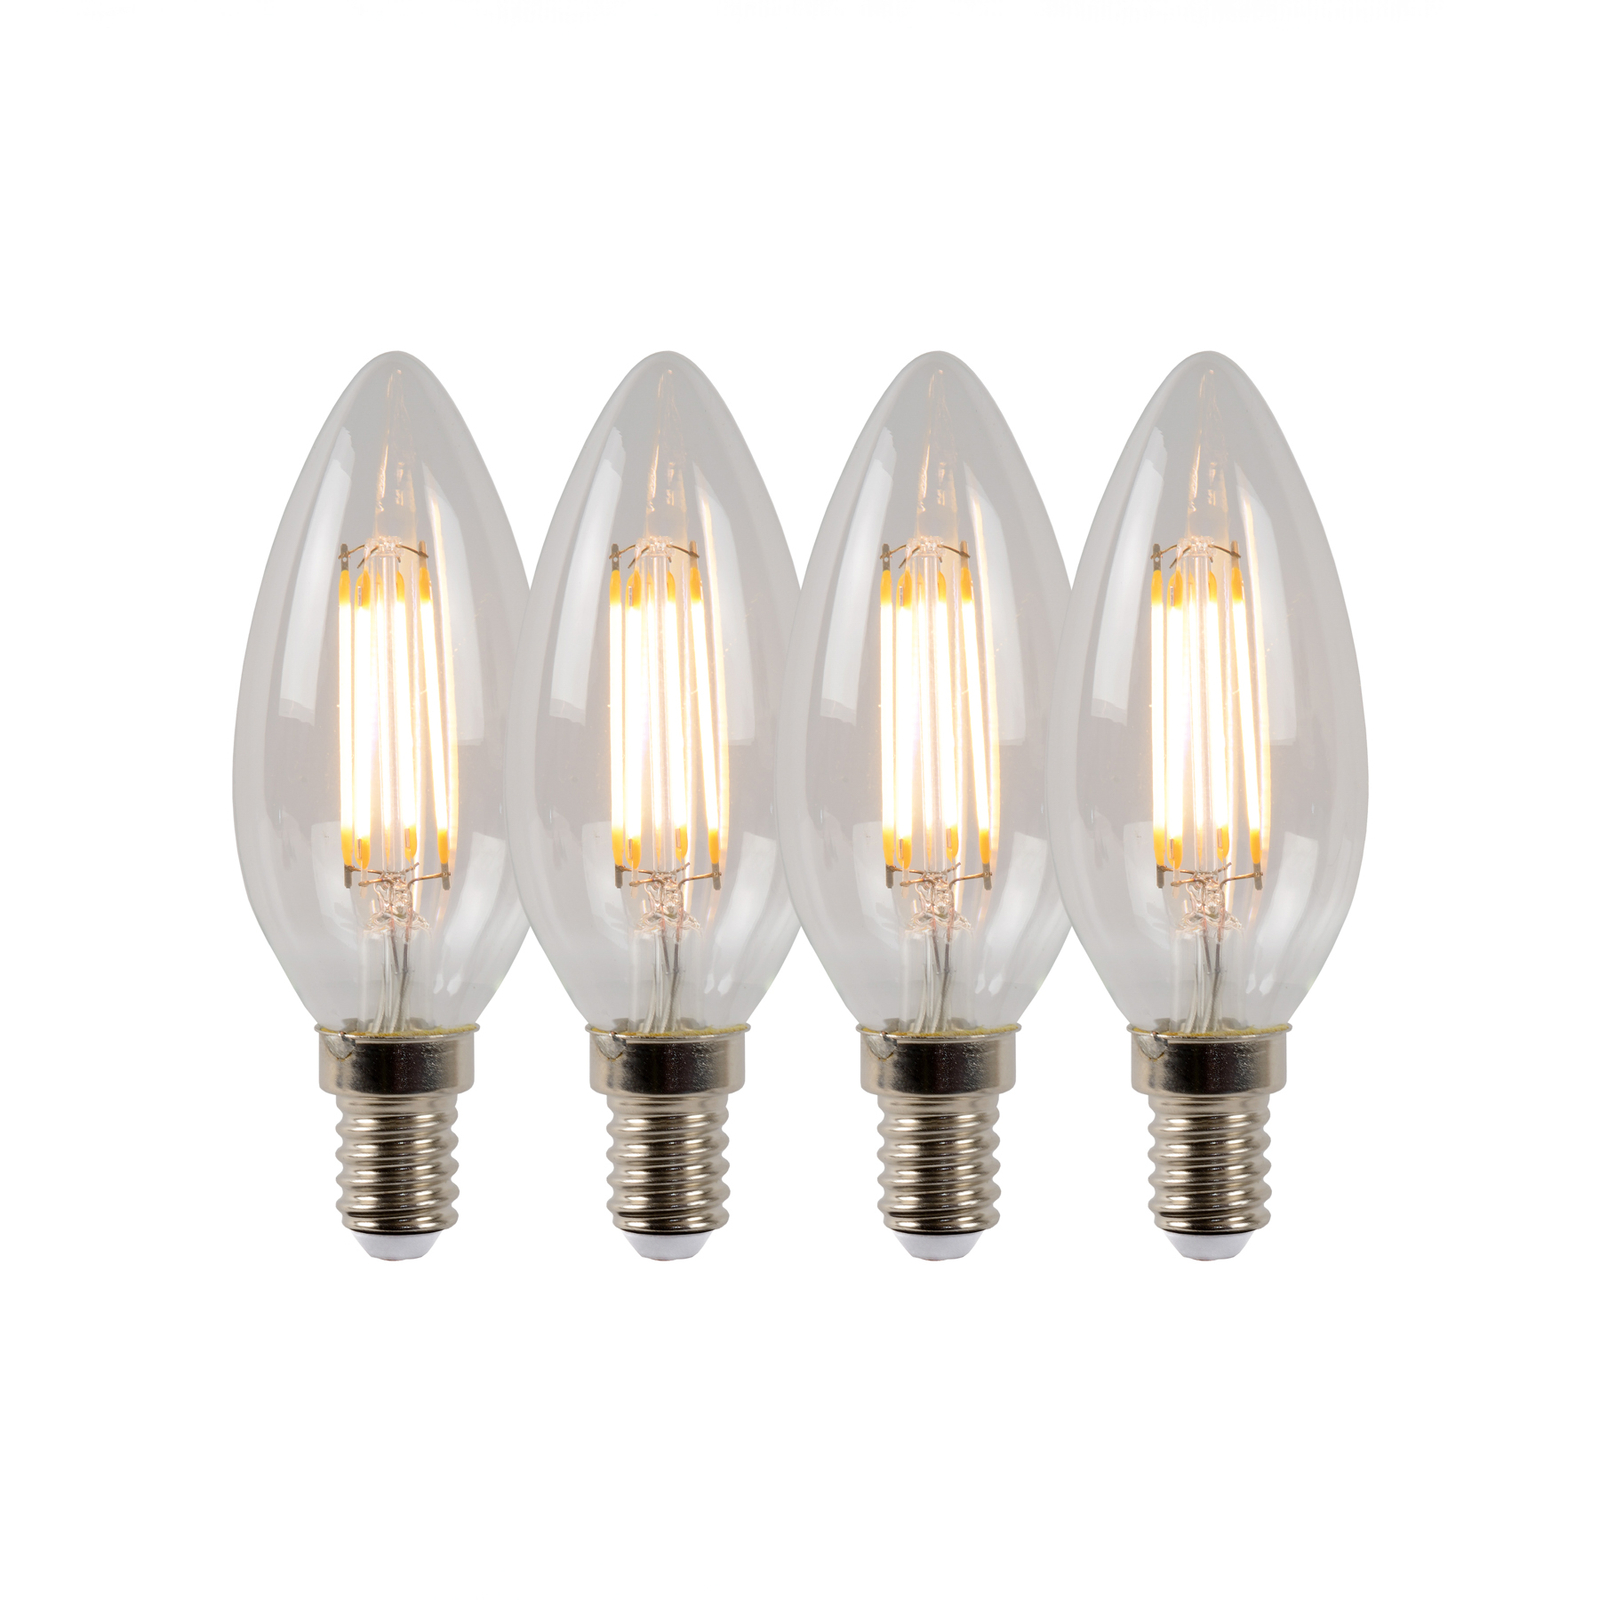 Ampoule bougie LED E14 4 W 2 700 K dimmable x4